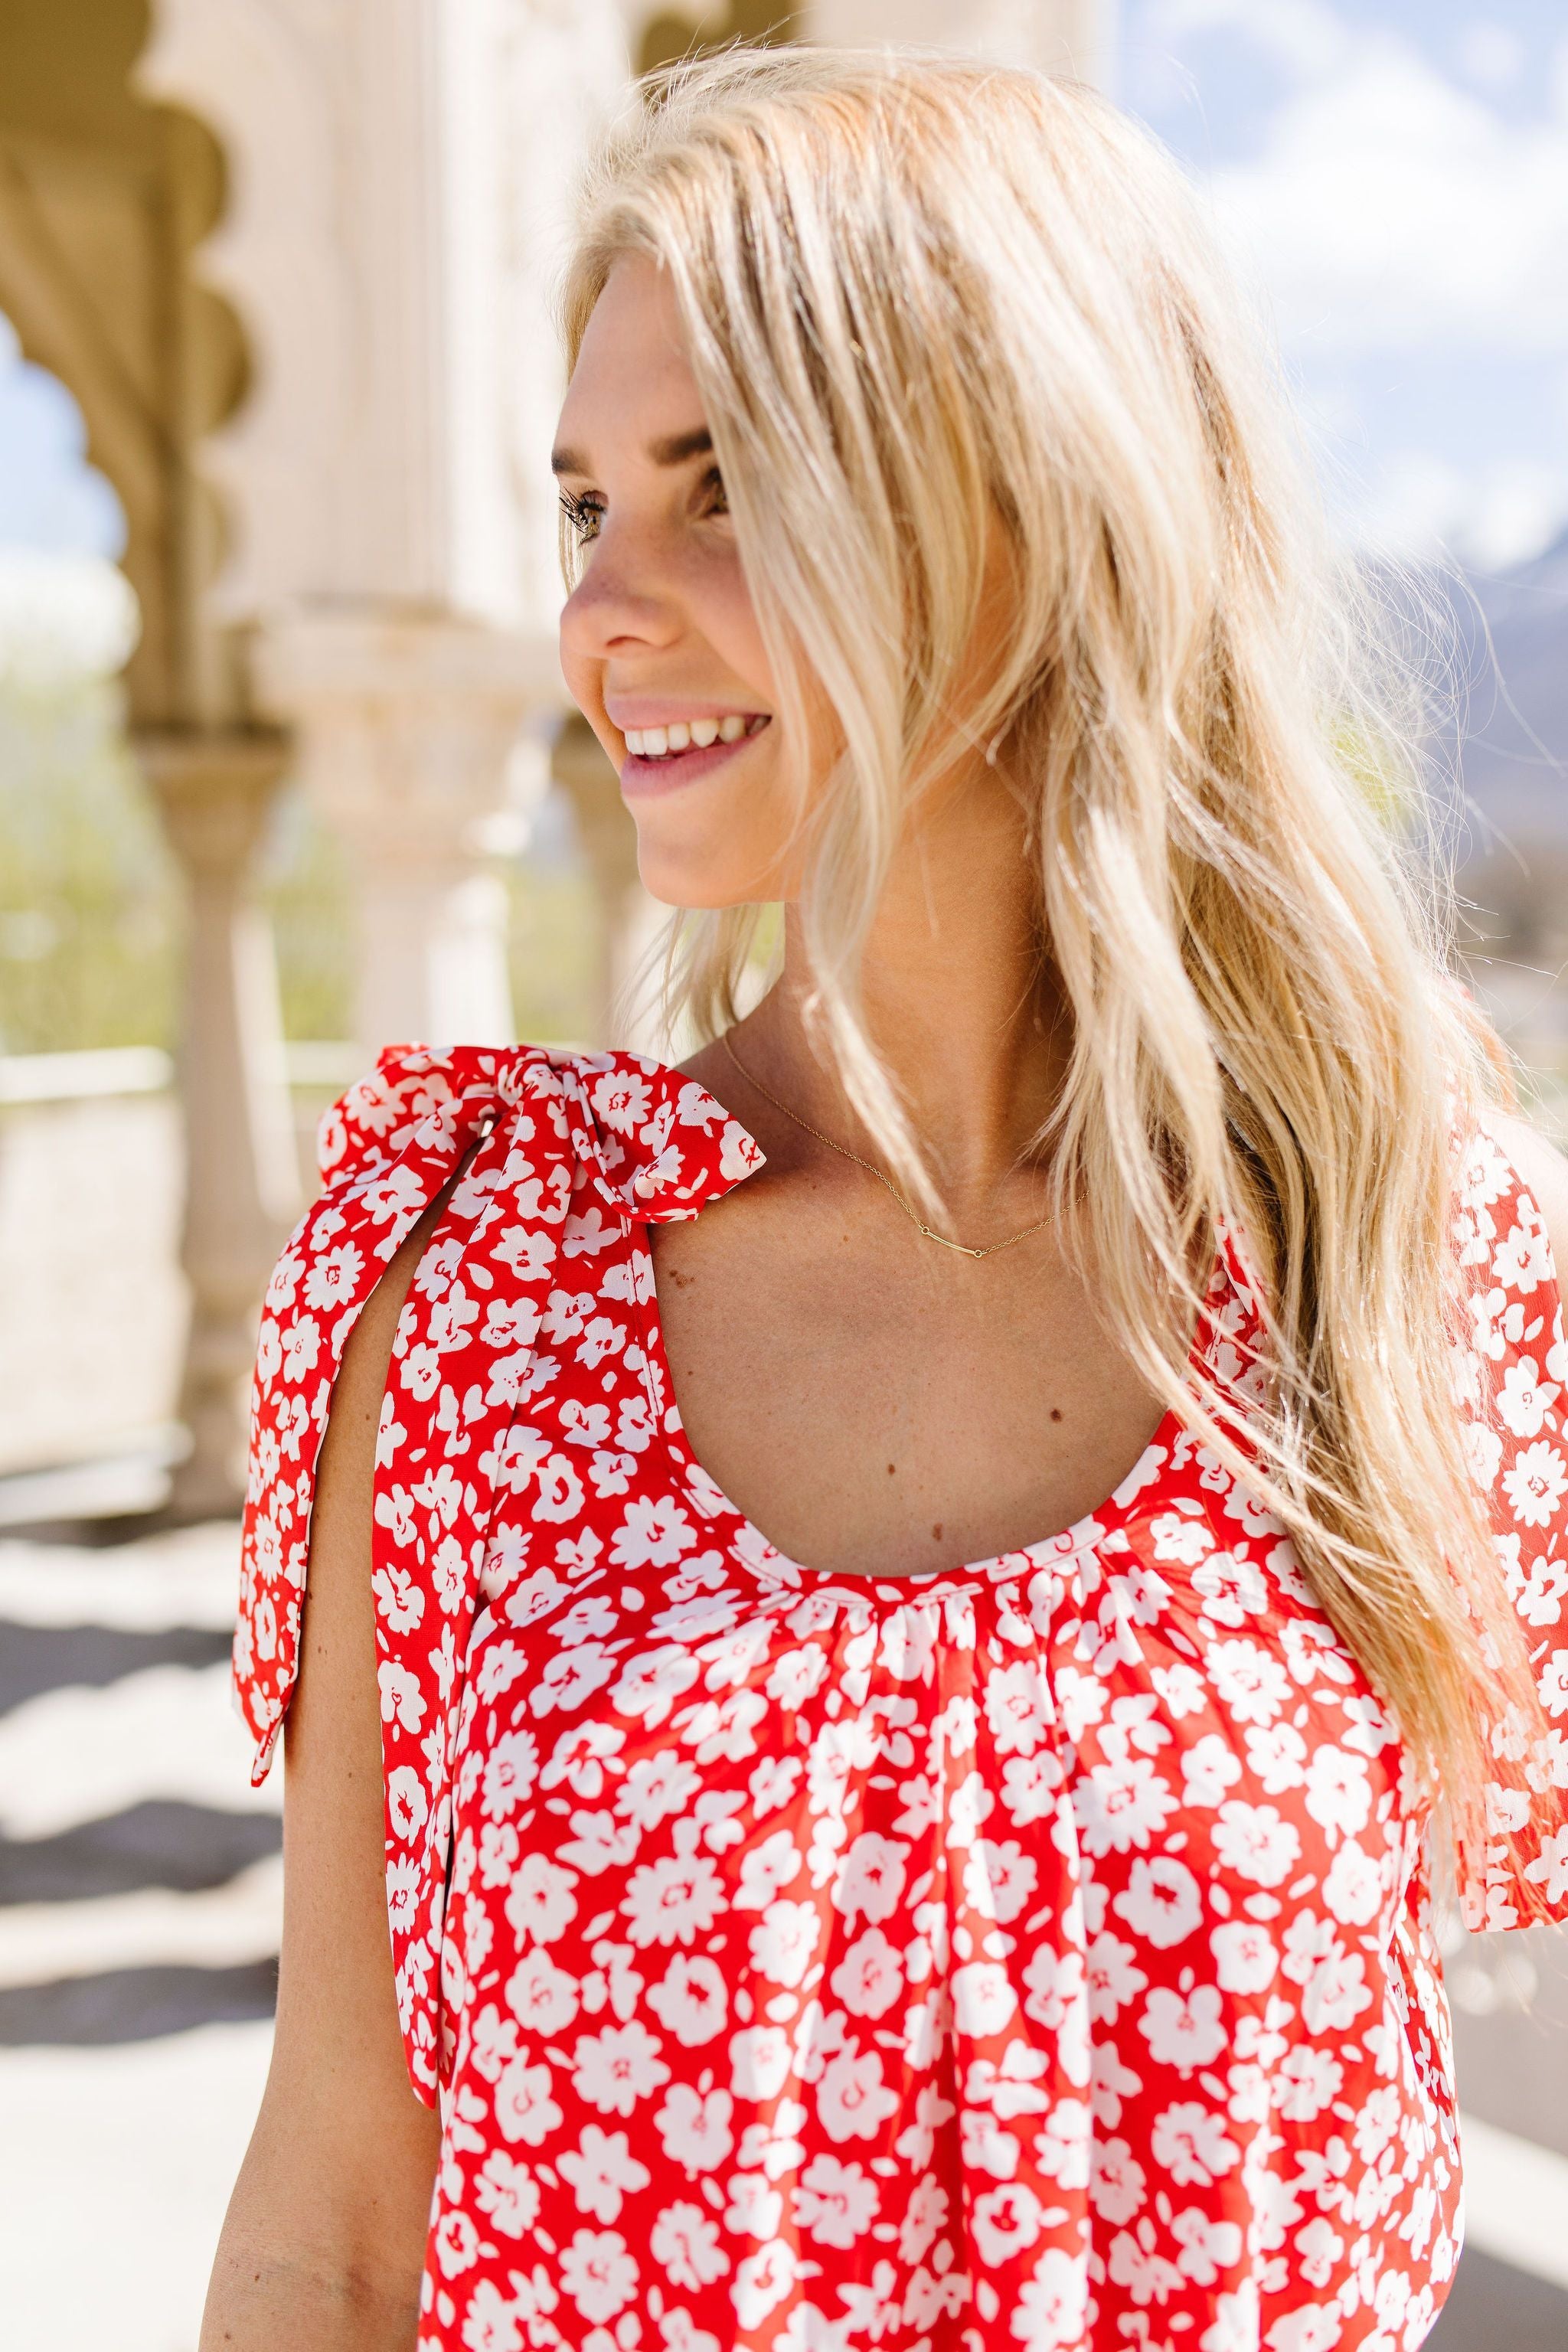 Spotted Rosette Dress In Red Coral